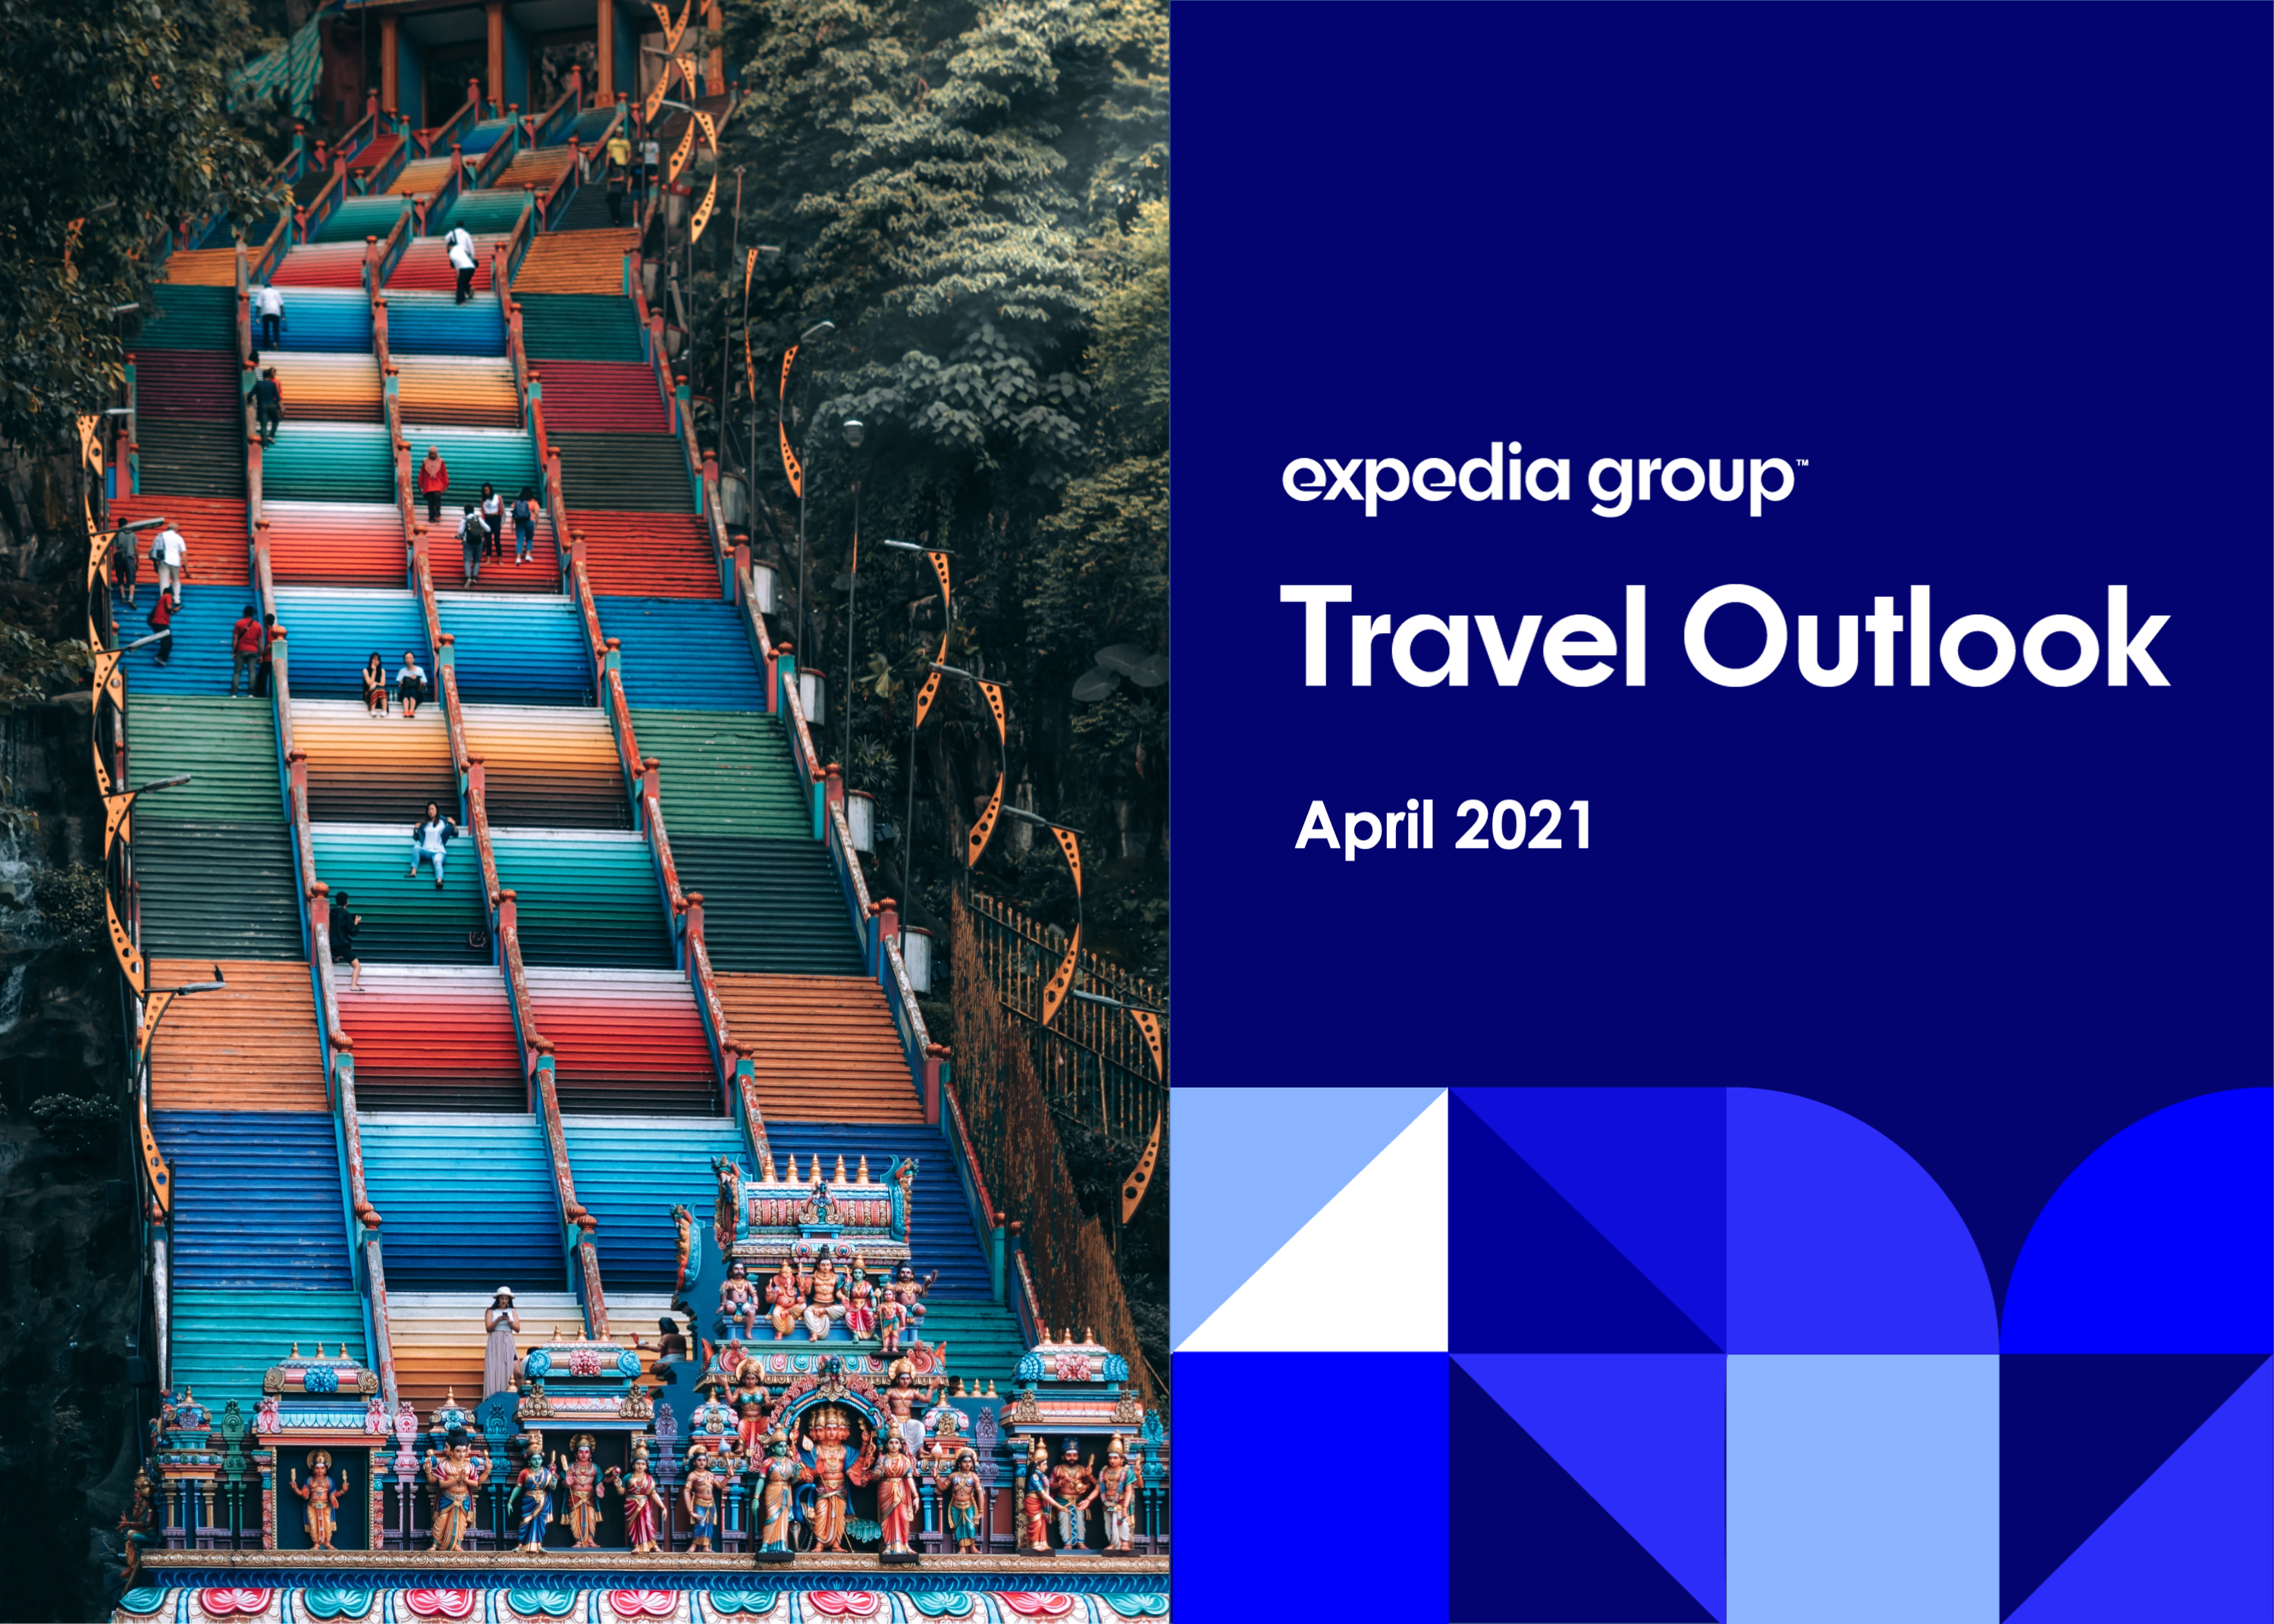 Expedia Group Travel Outlook April 2021